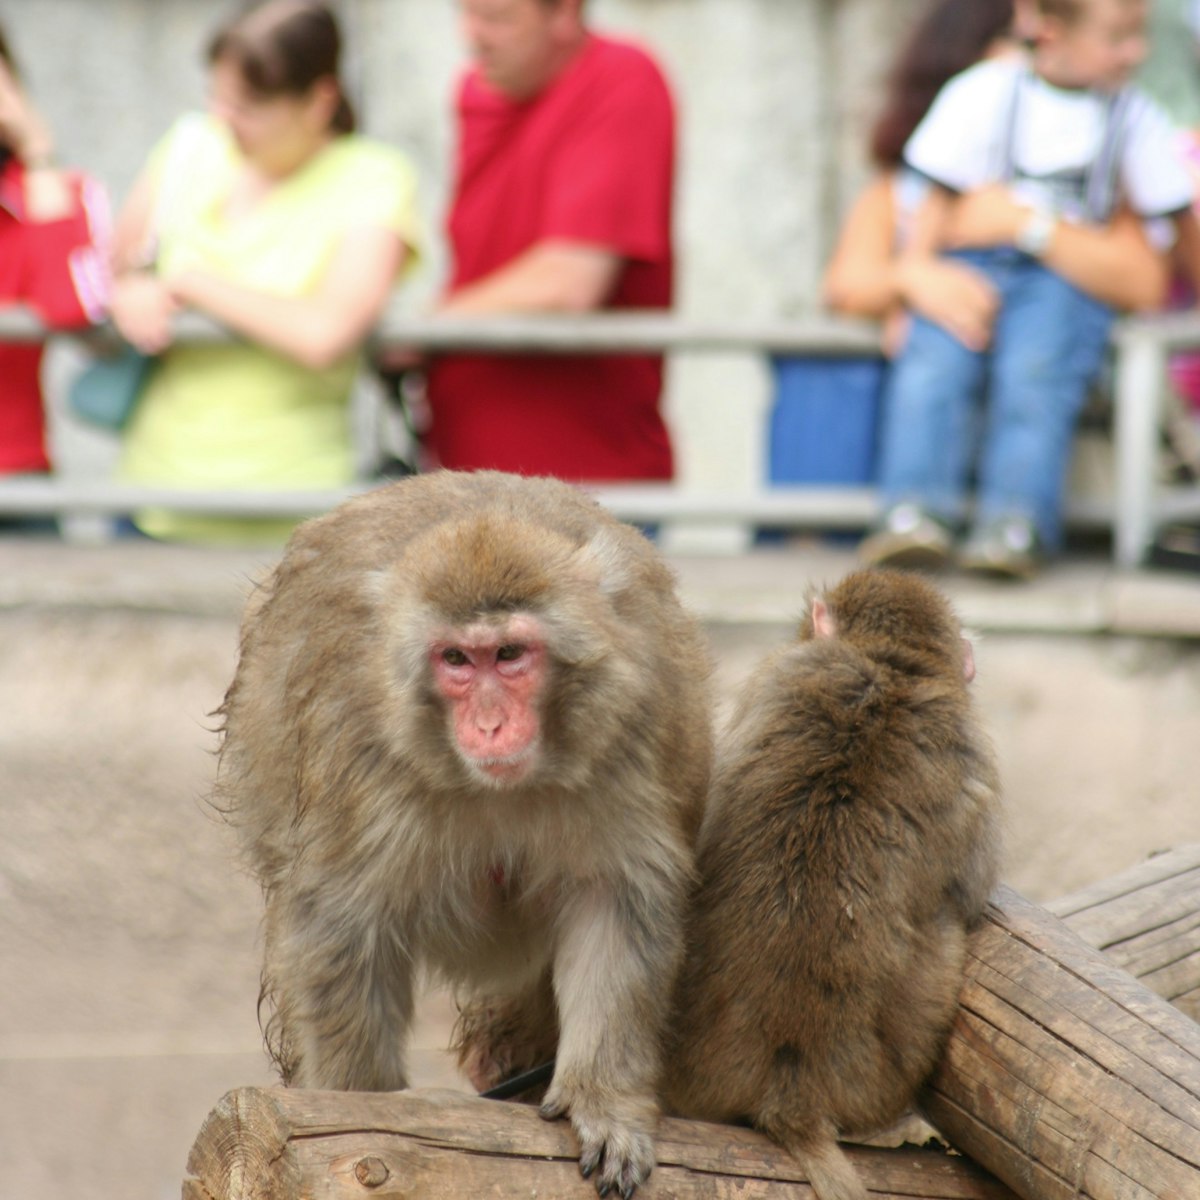 Monkeys at Moscow Zoo.